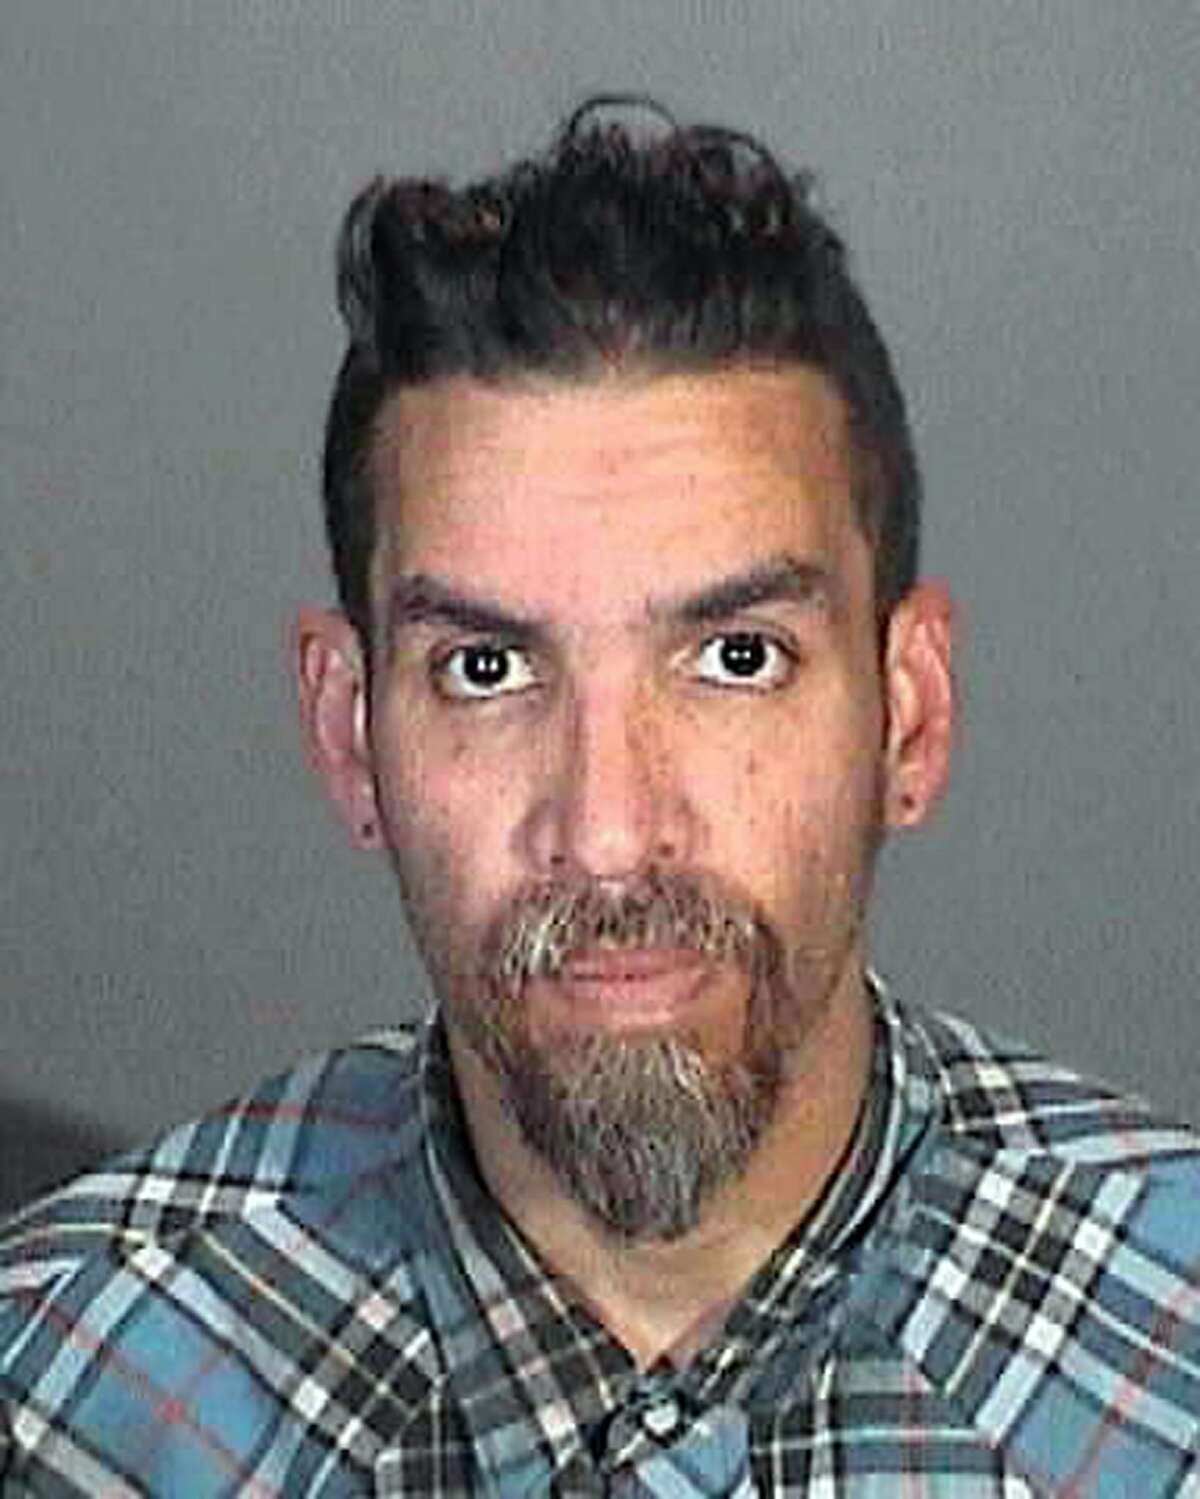 This March 12, 2015 booking photo provided by the Glendale, Calif., Police Department shows Derick Ion Almena. Almena is an operator of the Ghost Ship warehouse in Oakland, in which dozens of people died in a fire that started Dec. 2, 2016. Spokeswoman Tawnee Lightfoot says Almena was stopped for driving with expired registration and, after a consensual search, two license plates from Oakland-area stolen cars were found. The charges apparently were not pursued. (Glendale Police Department via AP)